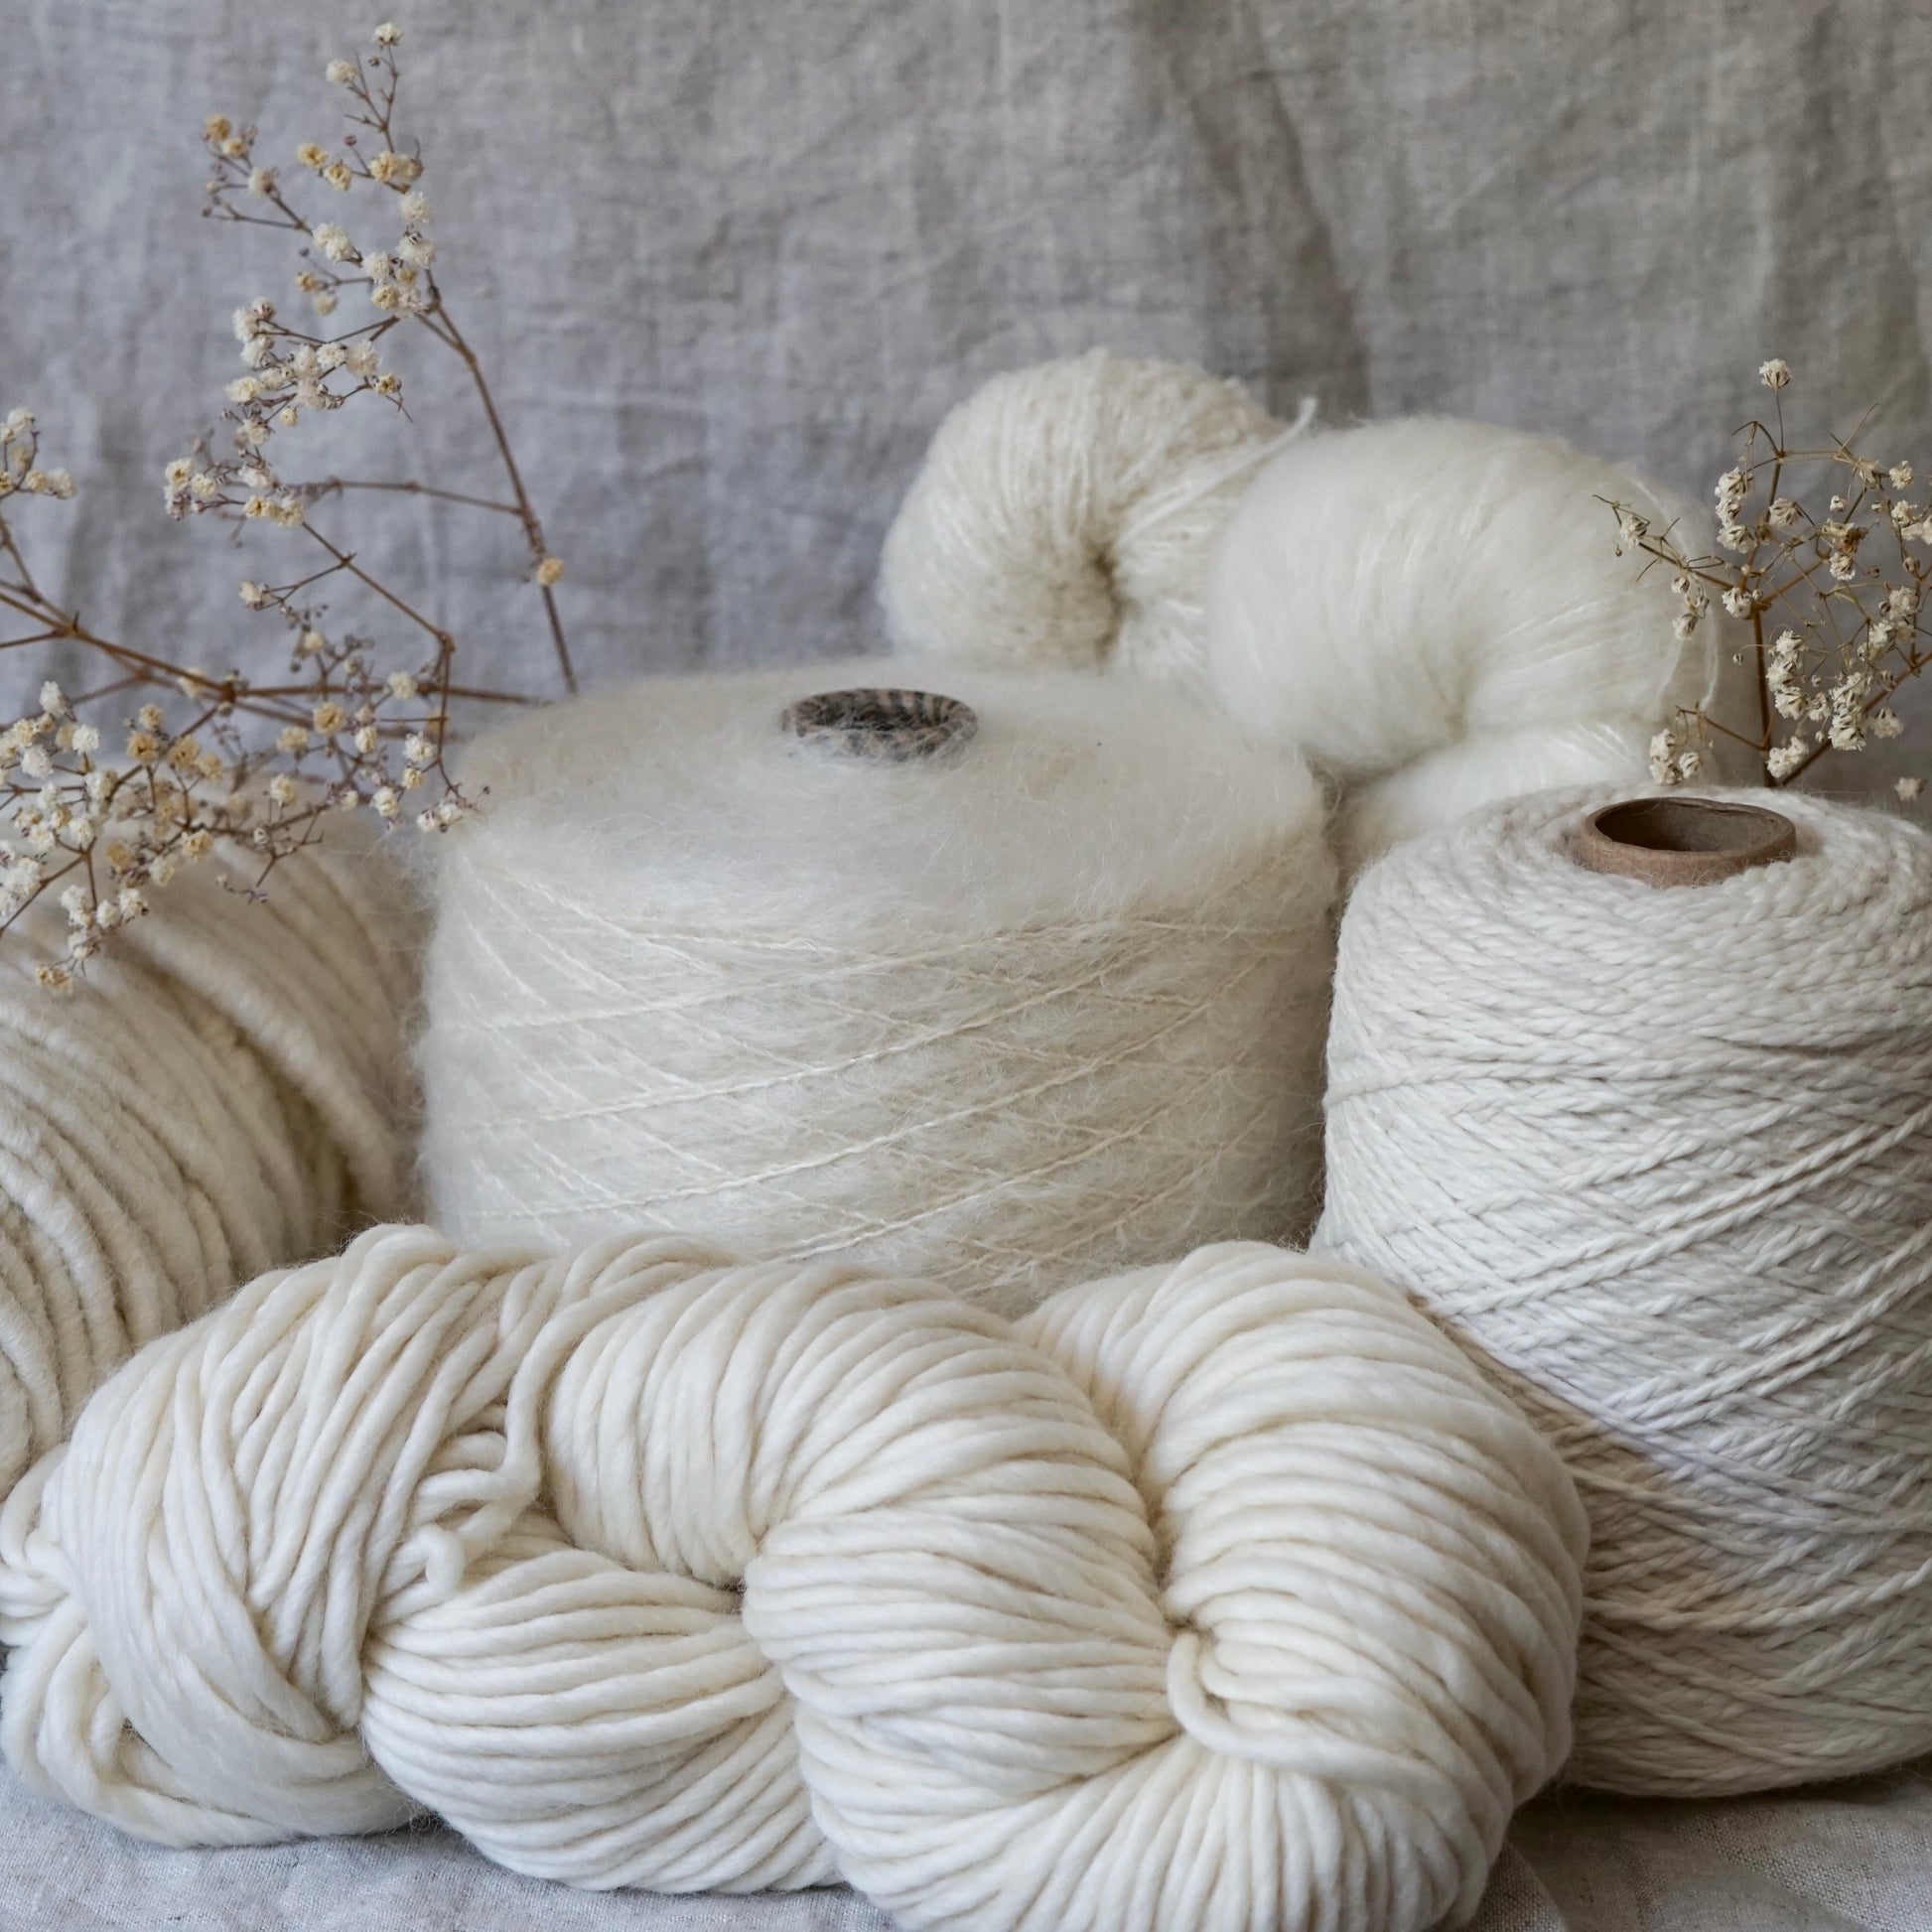 Brushed Mohair Yarn - The Unusual Pear